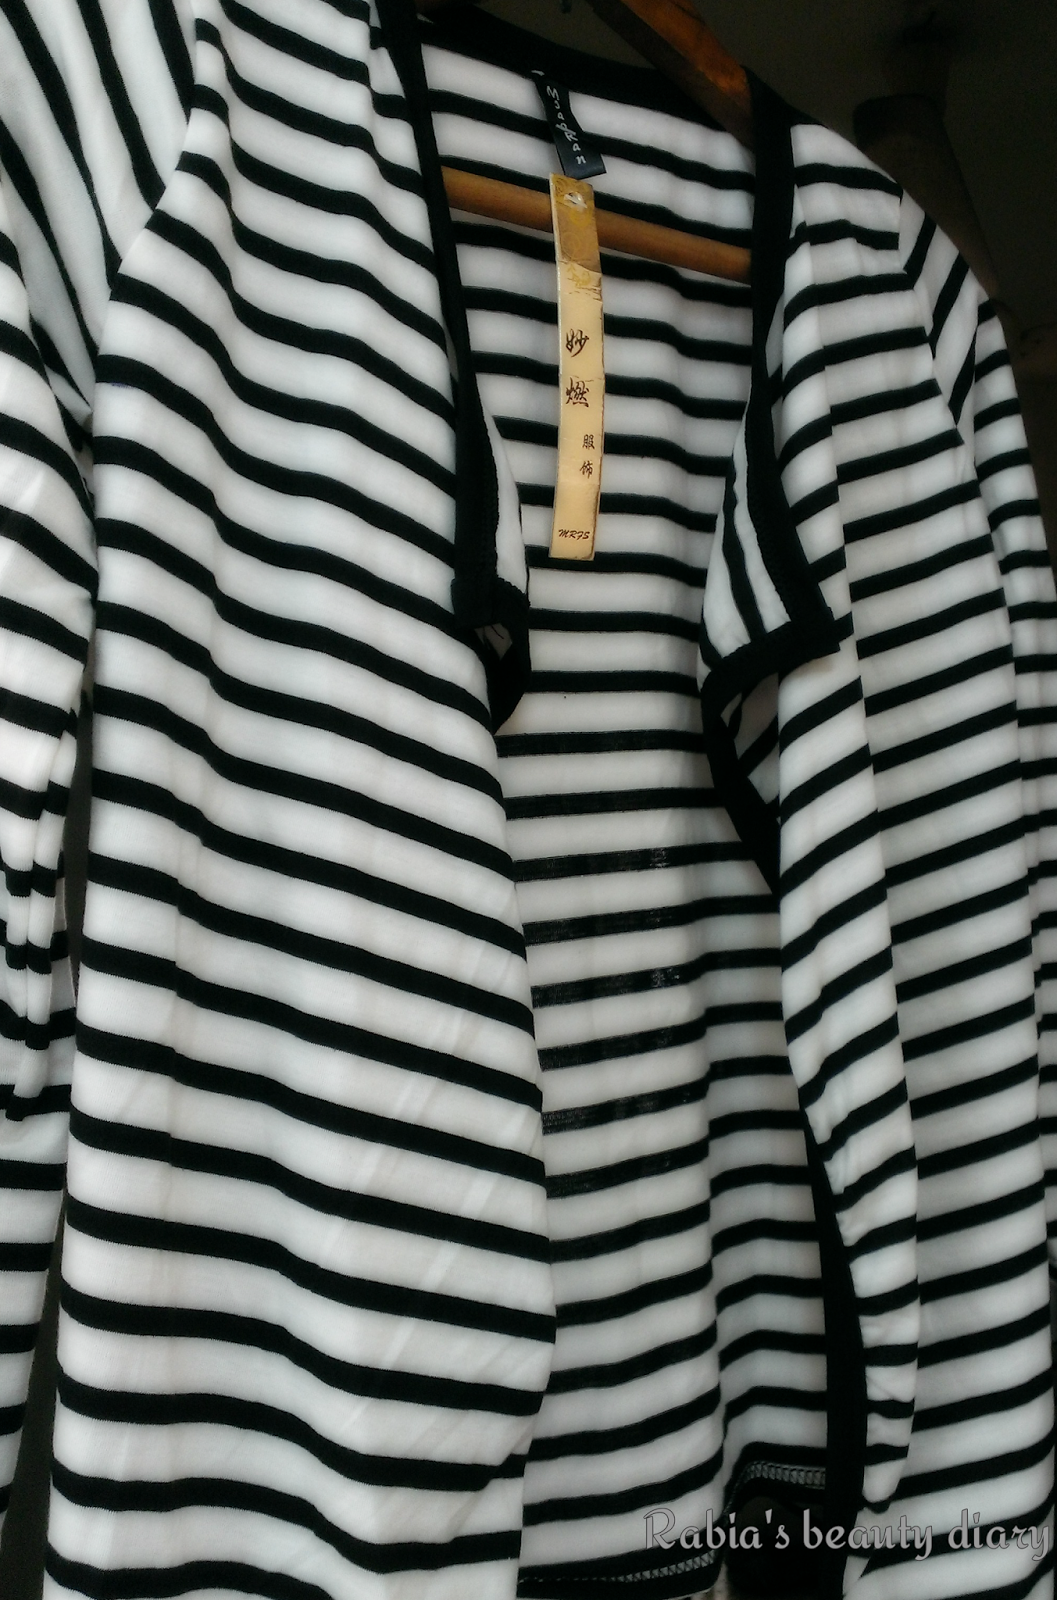 Rabia's beauty diary: Outfit of the day Women's Stripe Cotton Outwear